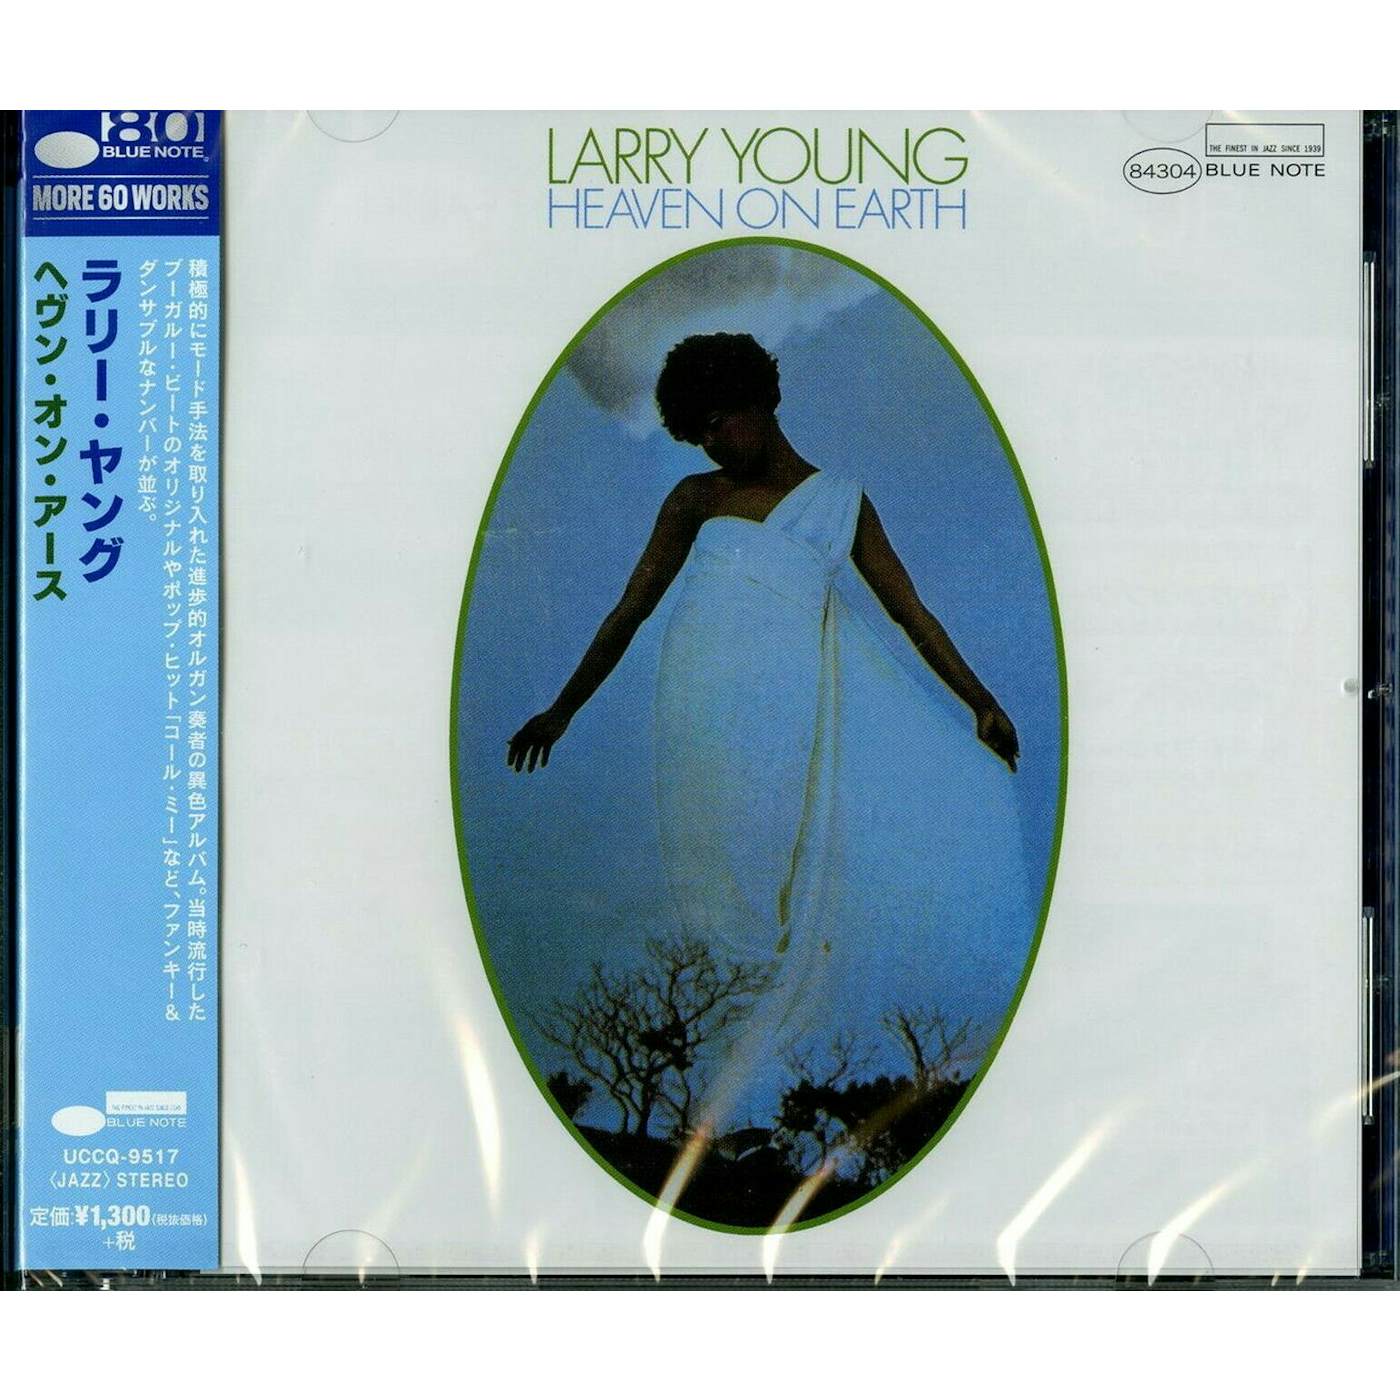 Larry Young HEAVEN ON EARTH CD